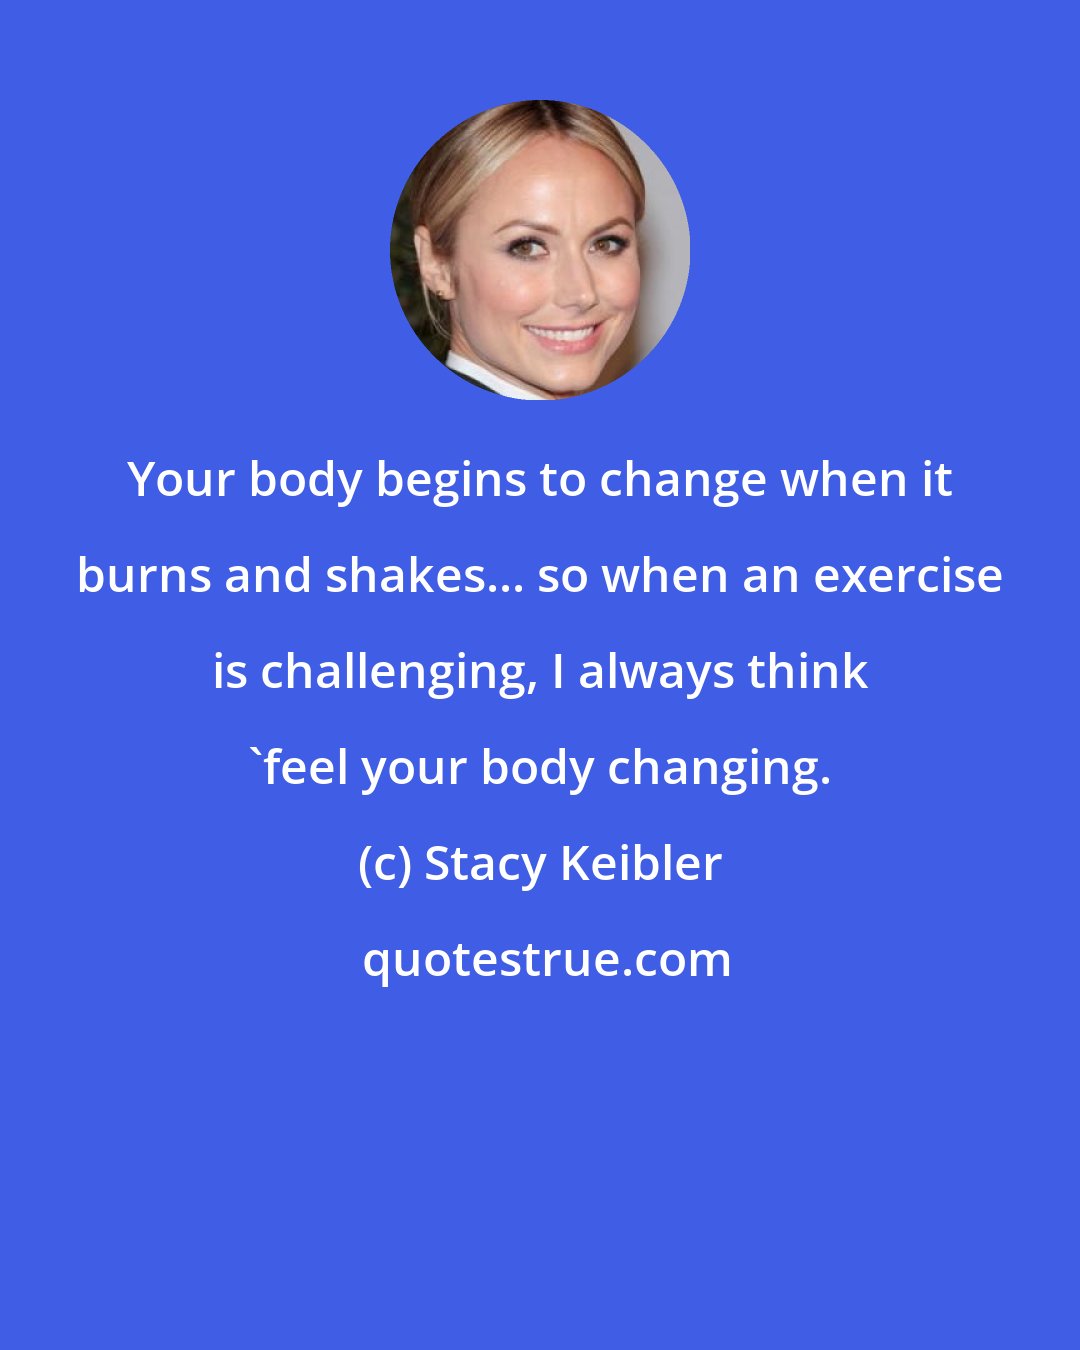 Stacy Keibler: Your body begins to change when it burns and shakes... so when an exercise is challenging, I always think 'feel your body changing.